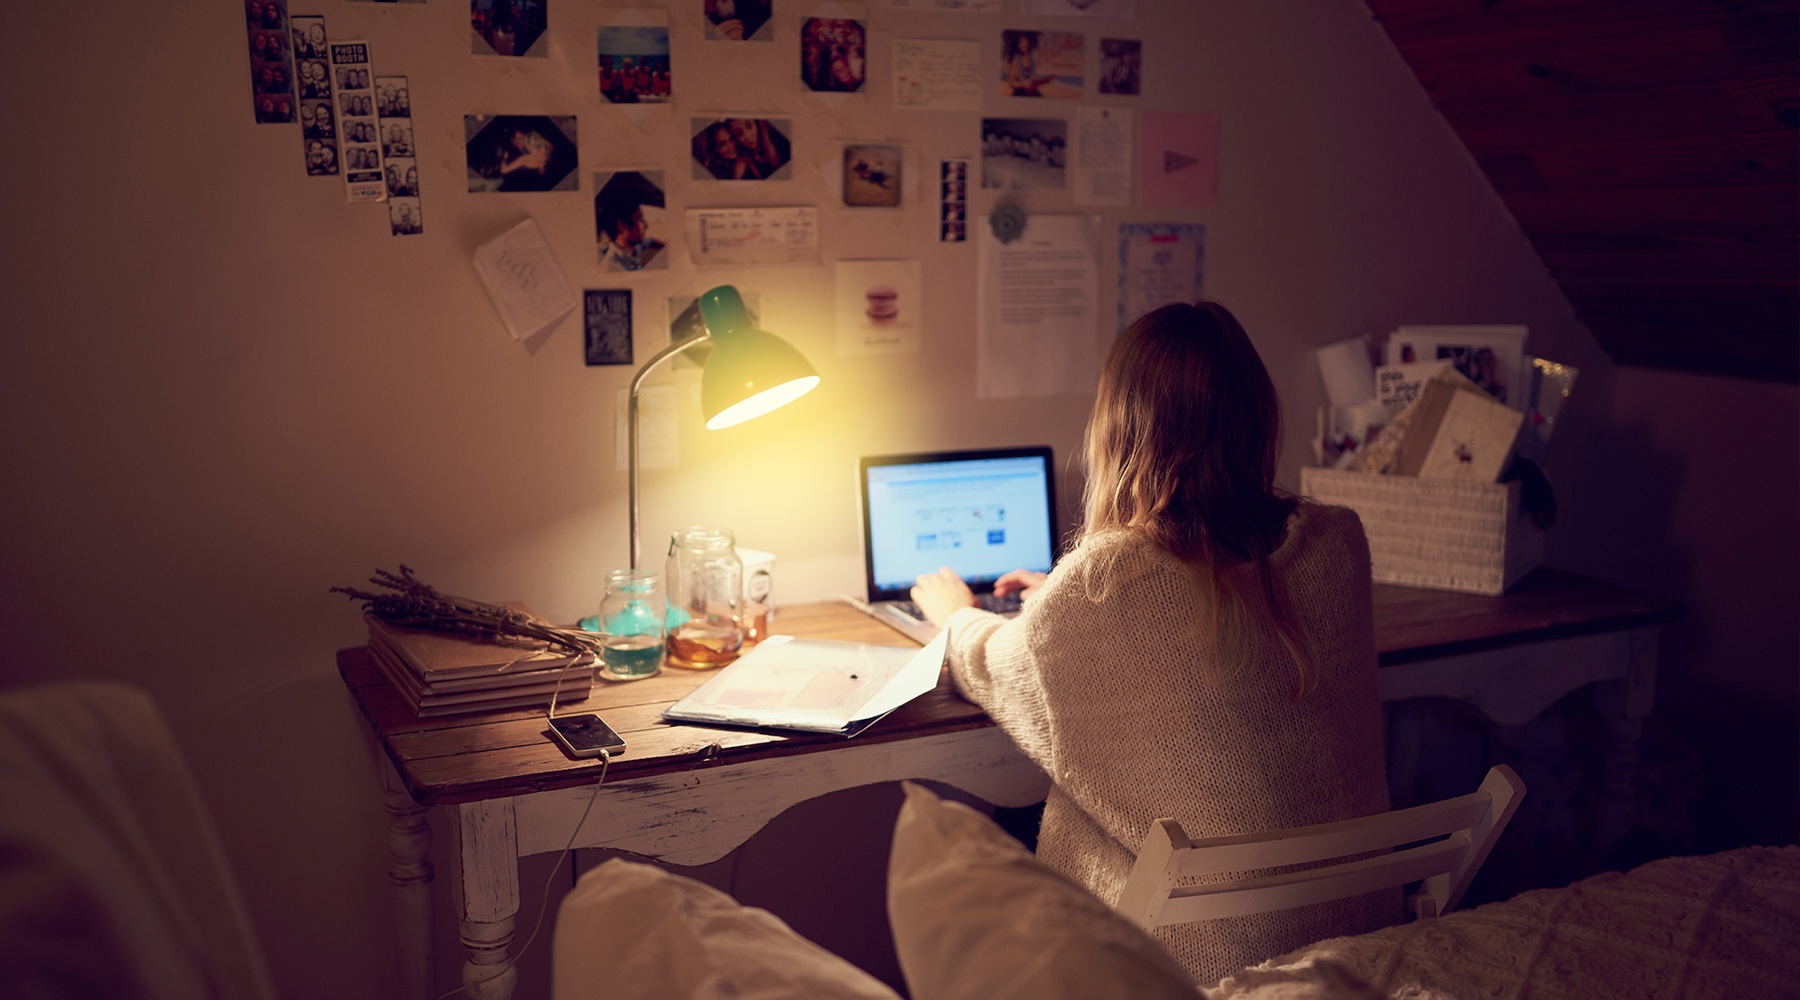 University Student working late in bedroom and suffering from stress